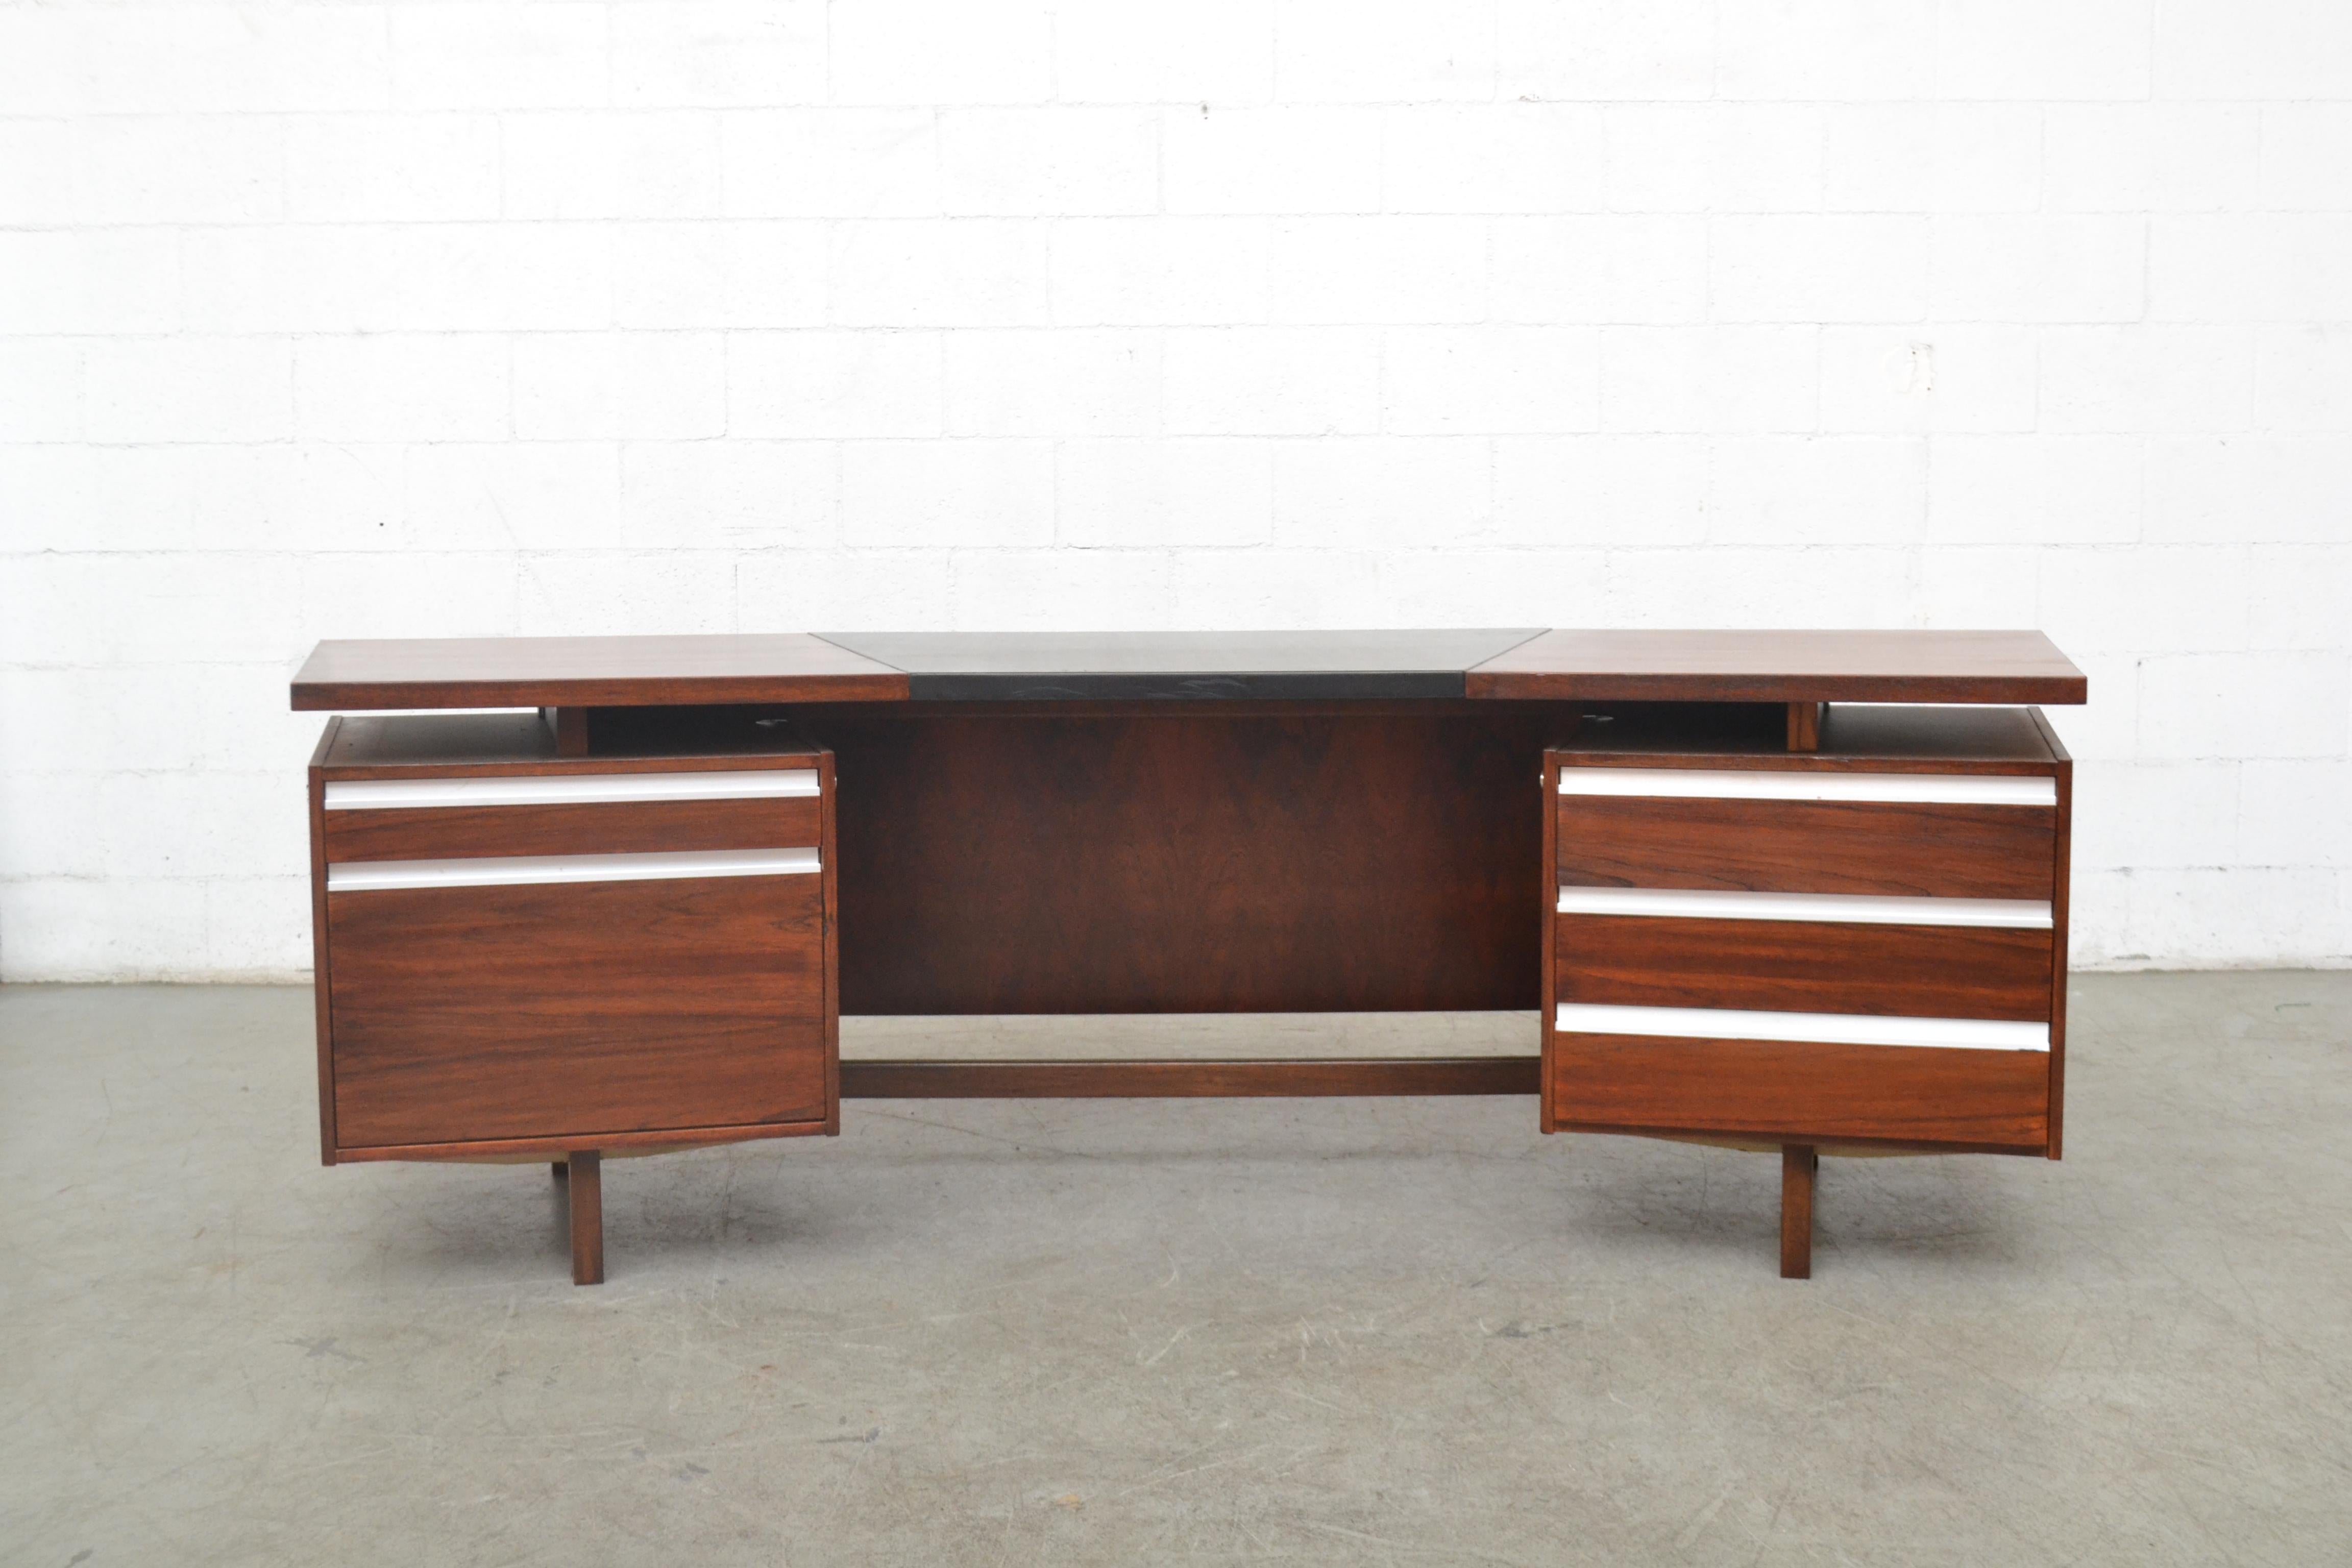 Impressive midcentury executive desk by Fristho. Lightly refinished rosewood with original black skai top. Visible wear and some scratches on the vinyl top. Right side has three sliding drawers and a filing cabinet and top drawer with sliding wood